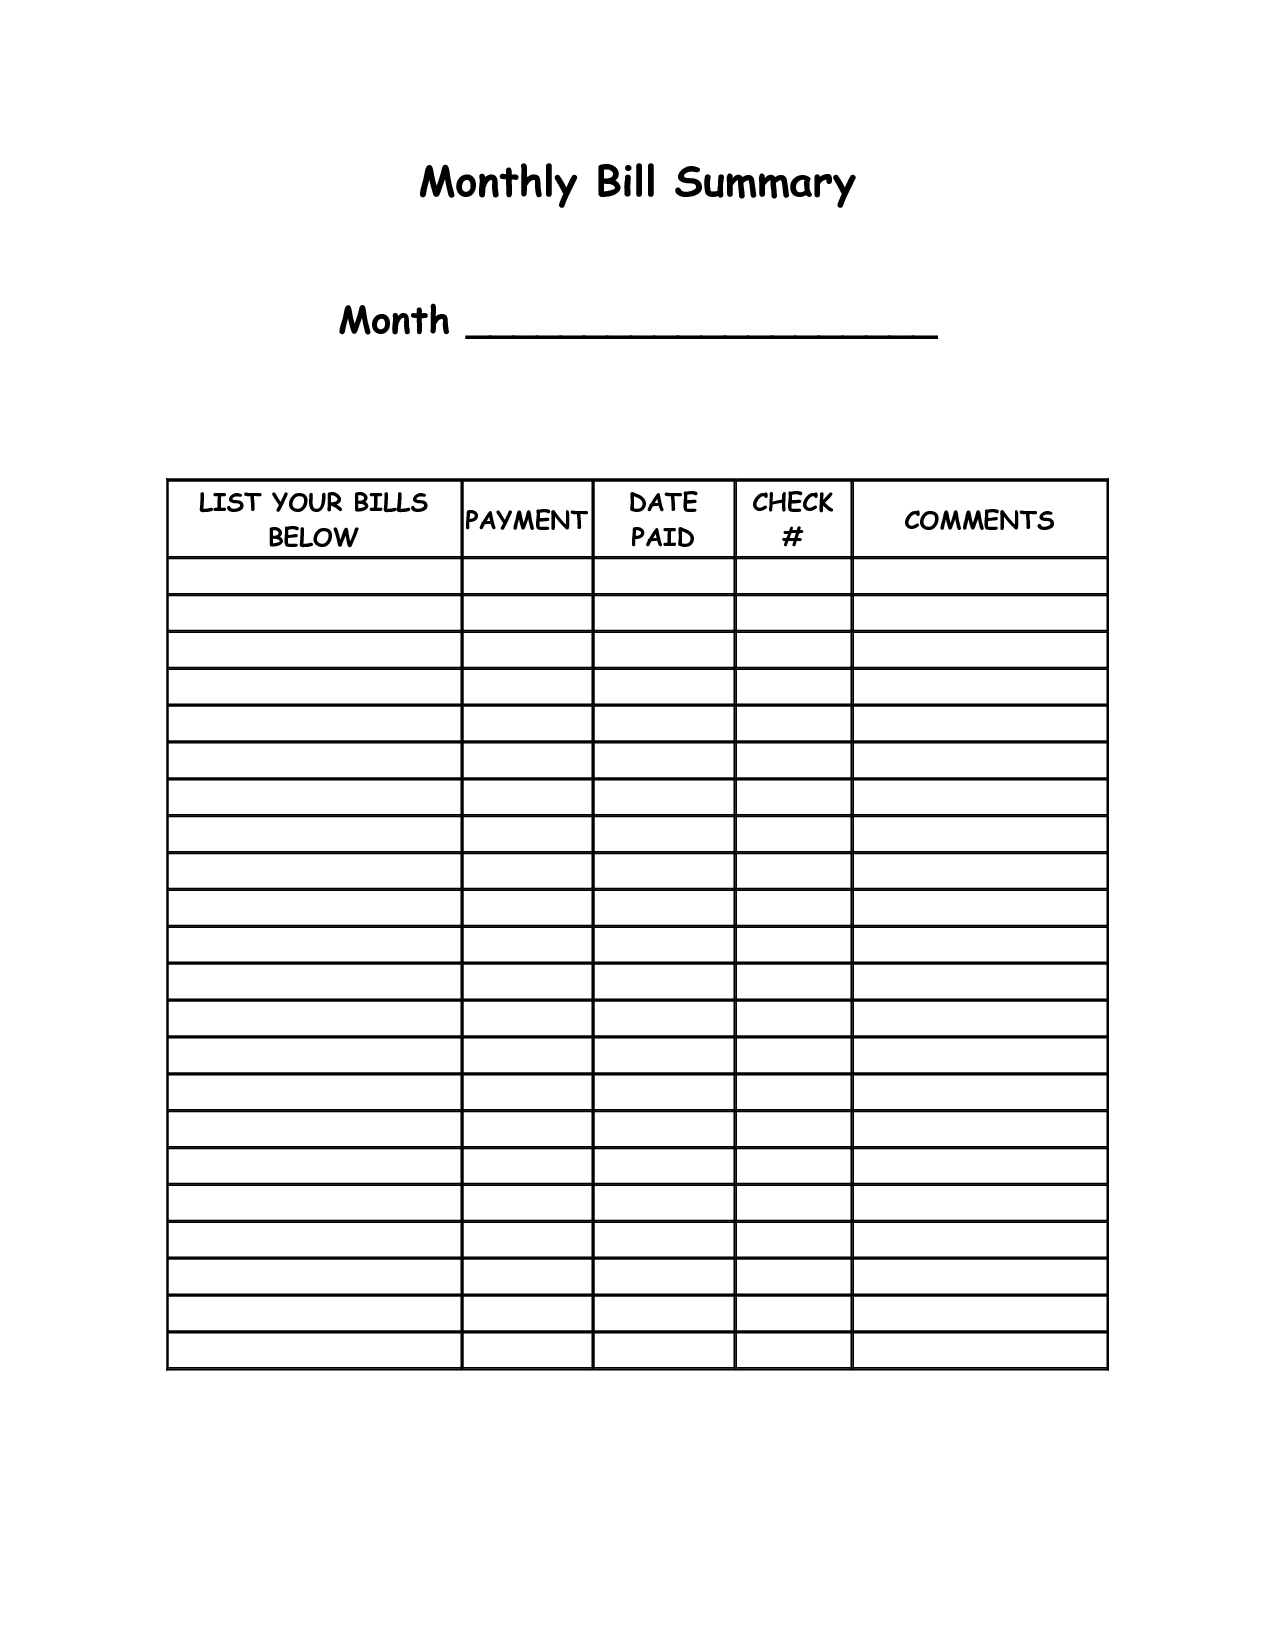 Blank Bill Payment Organizer | Monthly Bill Summary - Doc | Cats intended for Blank Monthly Bill Payment Sheet